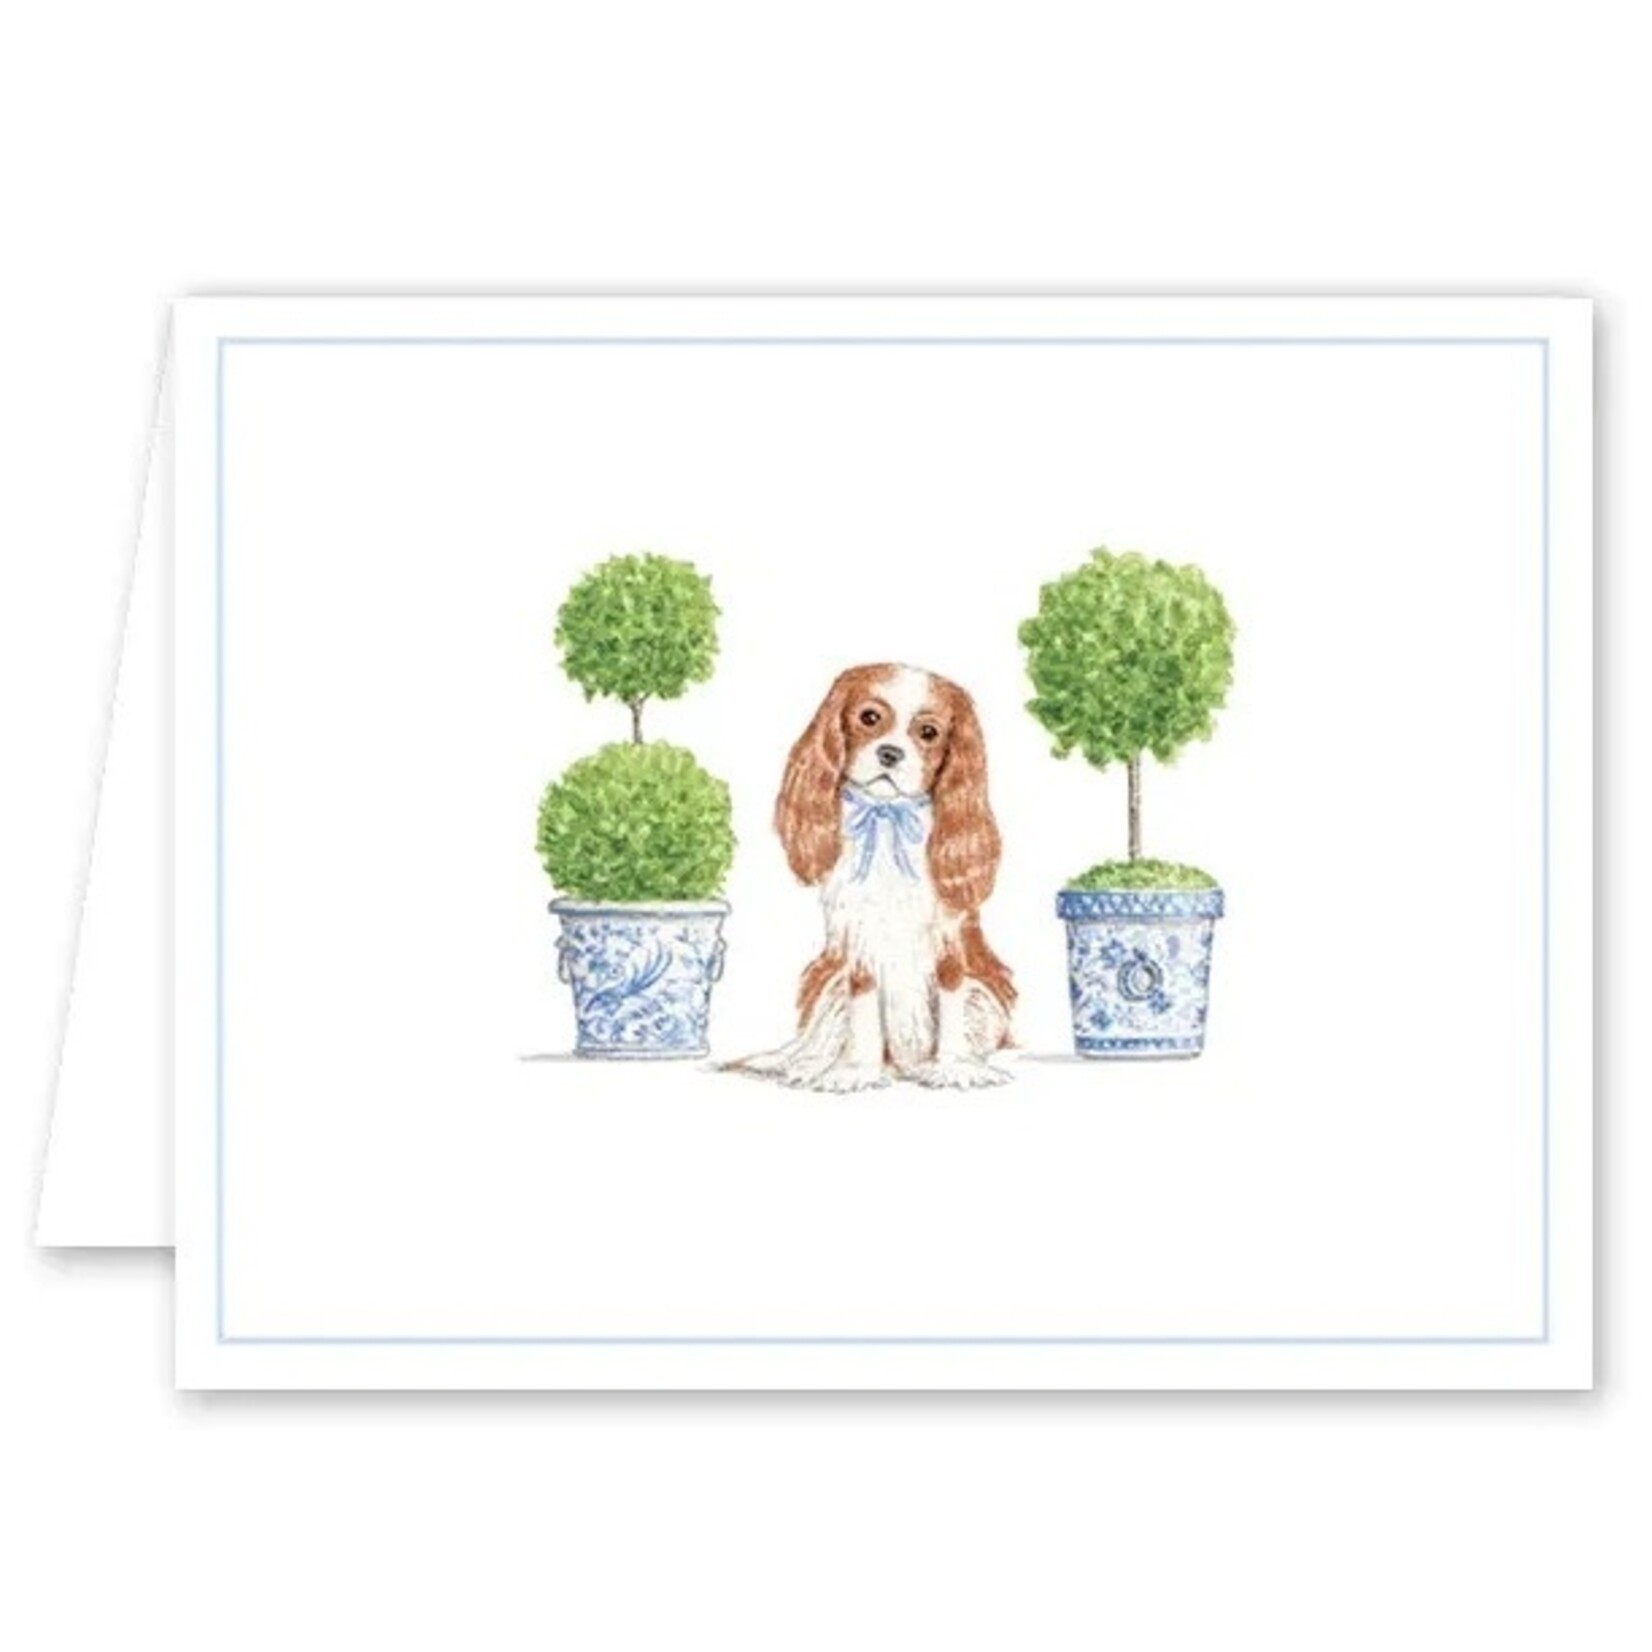 Dogwood Hill DASH TOPIARY AND TOILE CARD - 8 Cards/Envelopes